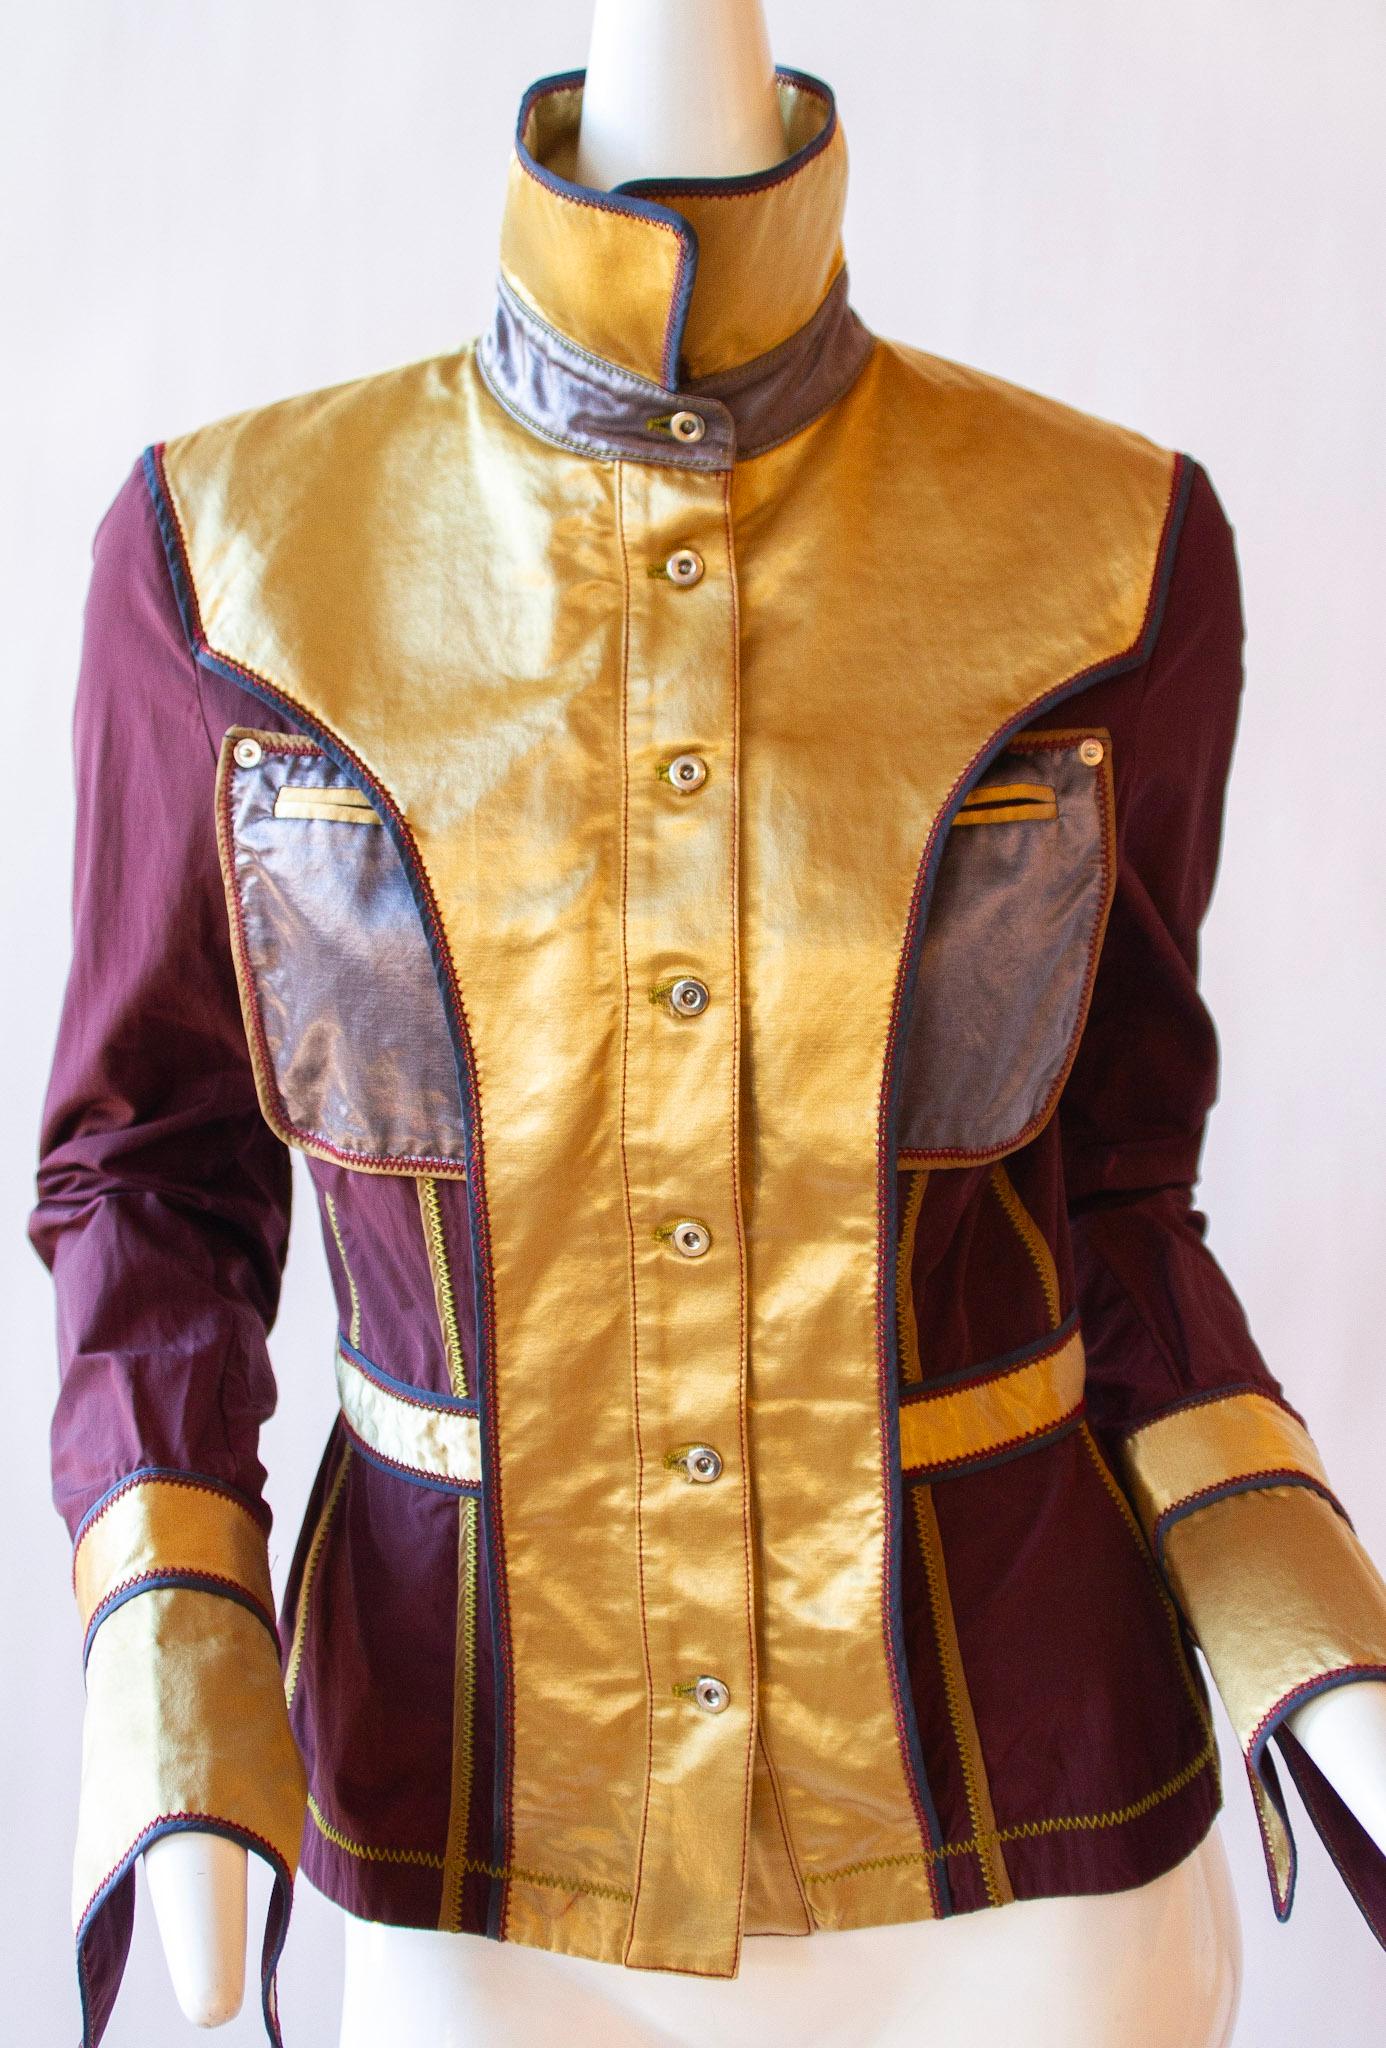 Gianfranco Ferre Metallic Jacket  In Excellent Condition For Sale In Kingston, NY